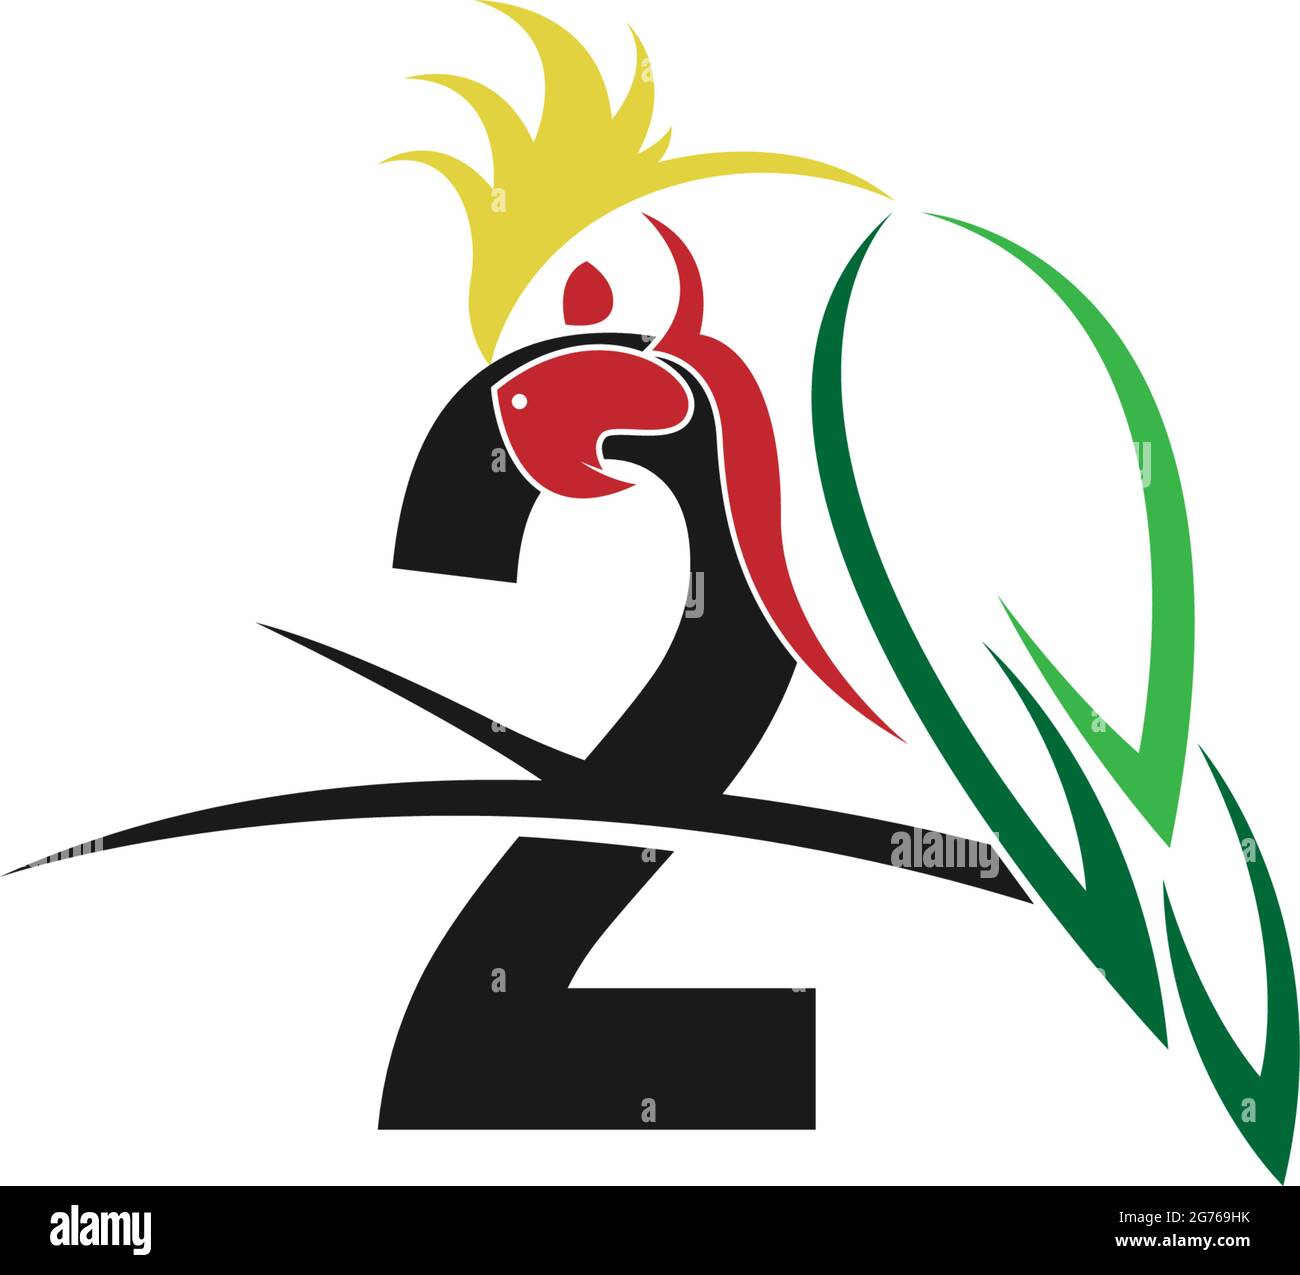 Number 2 with parrot bird icon logo design vector illustration Stock Vector